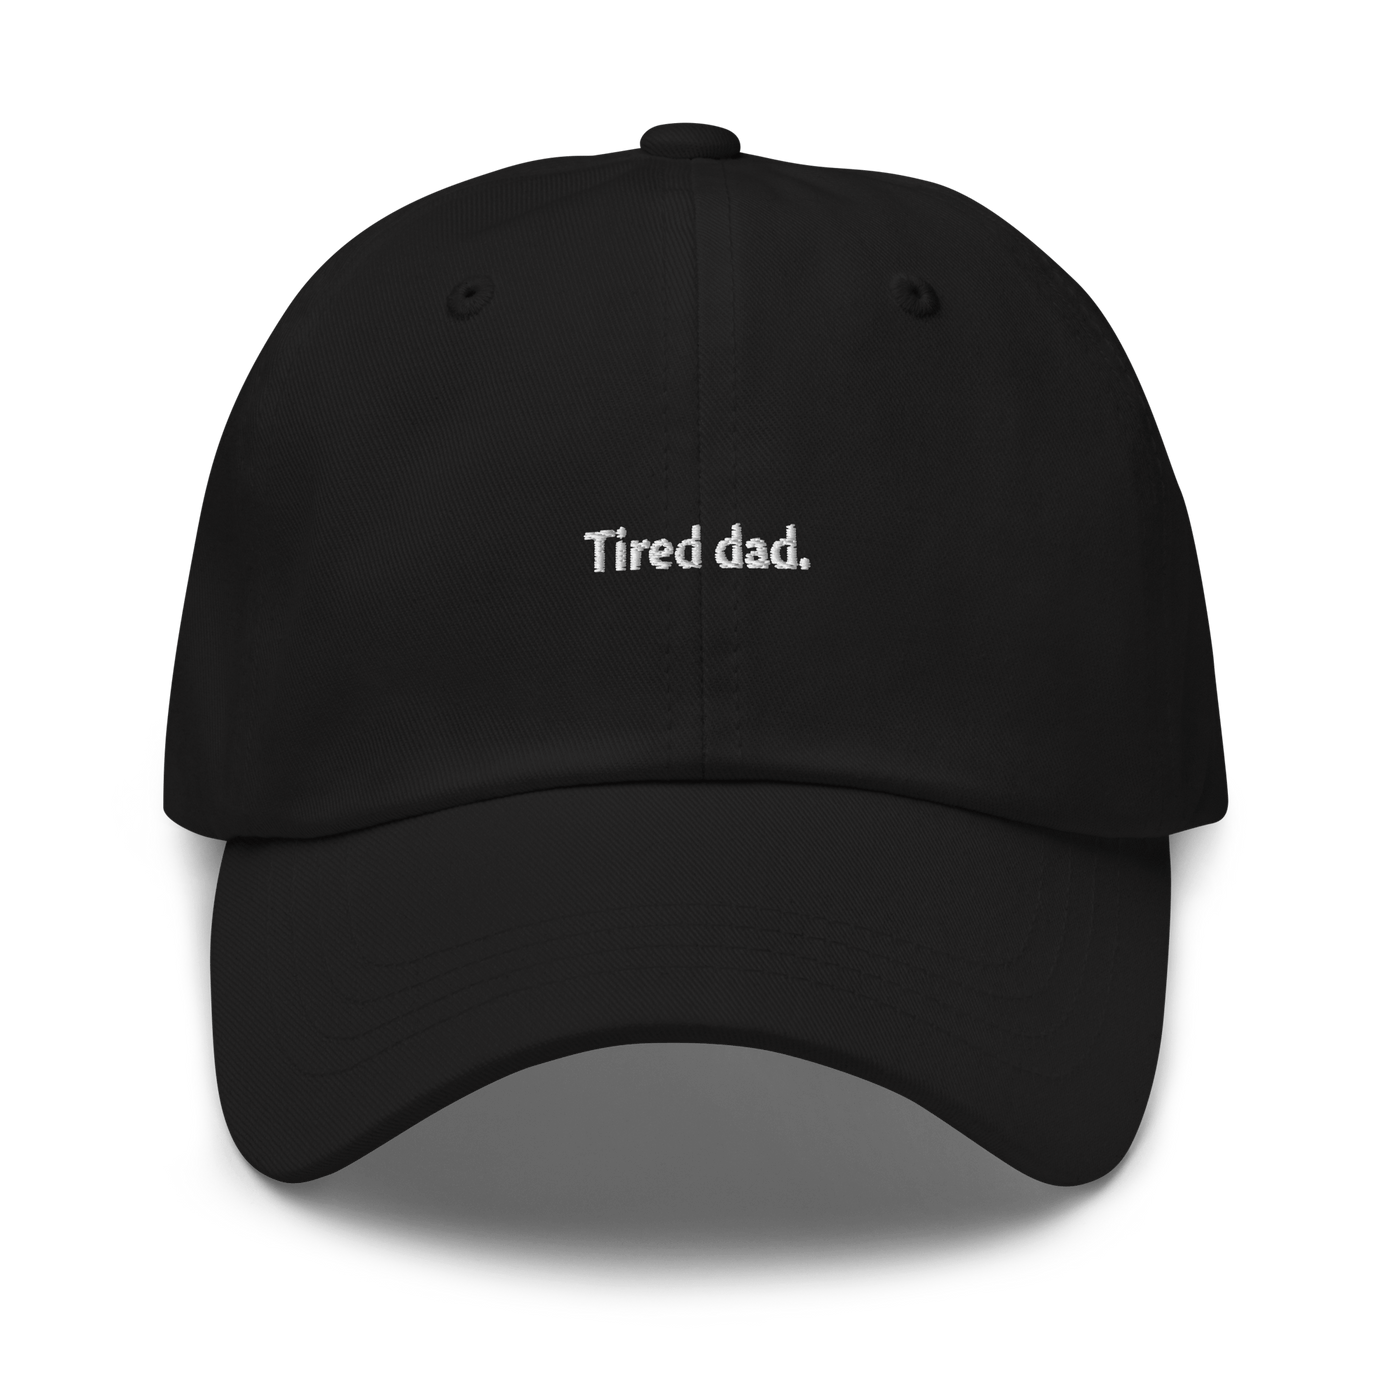 Tired Dad Hat - Black - - Just Another Cap Store